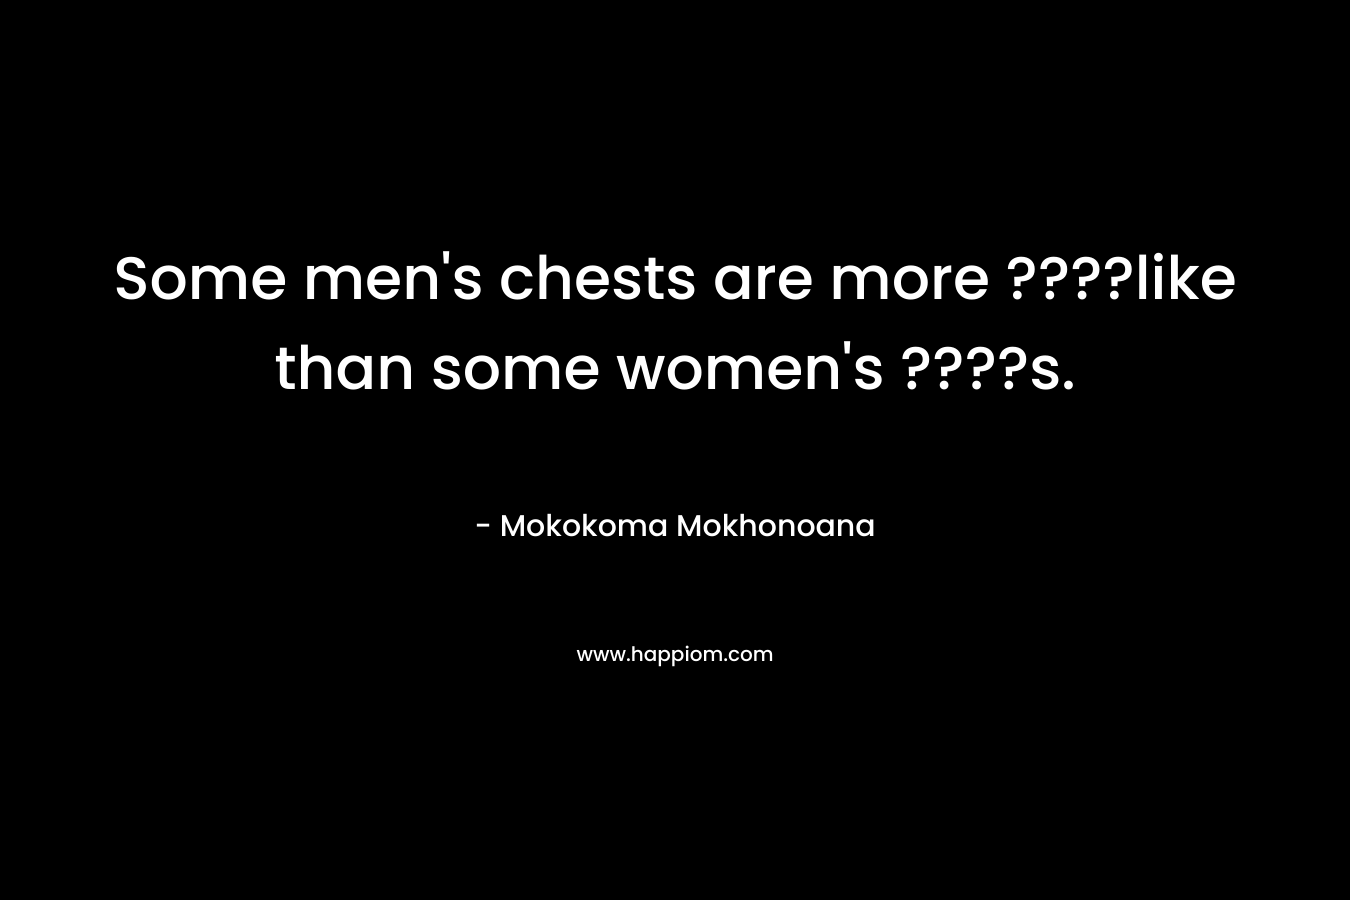 Some men's chests are more ????like than some women's ????s.